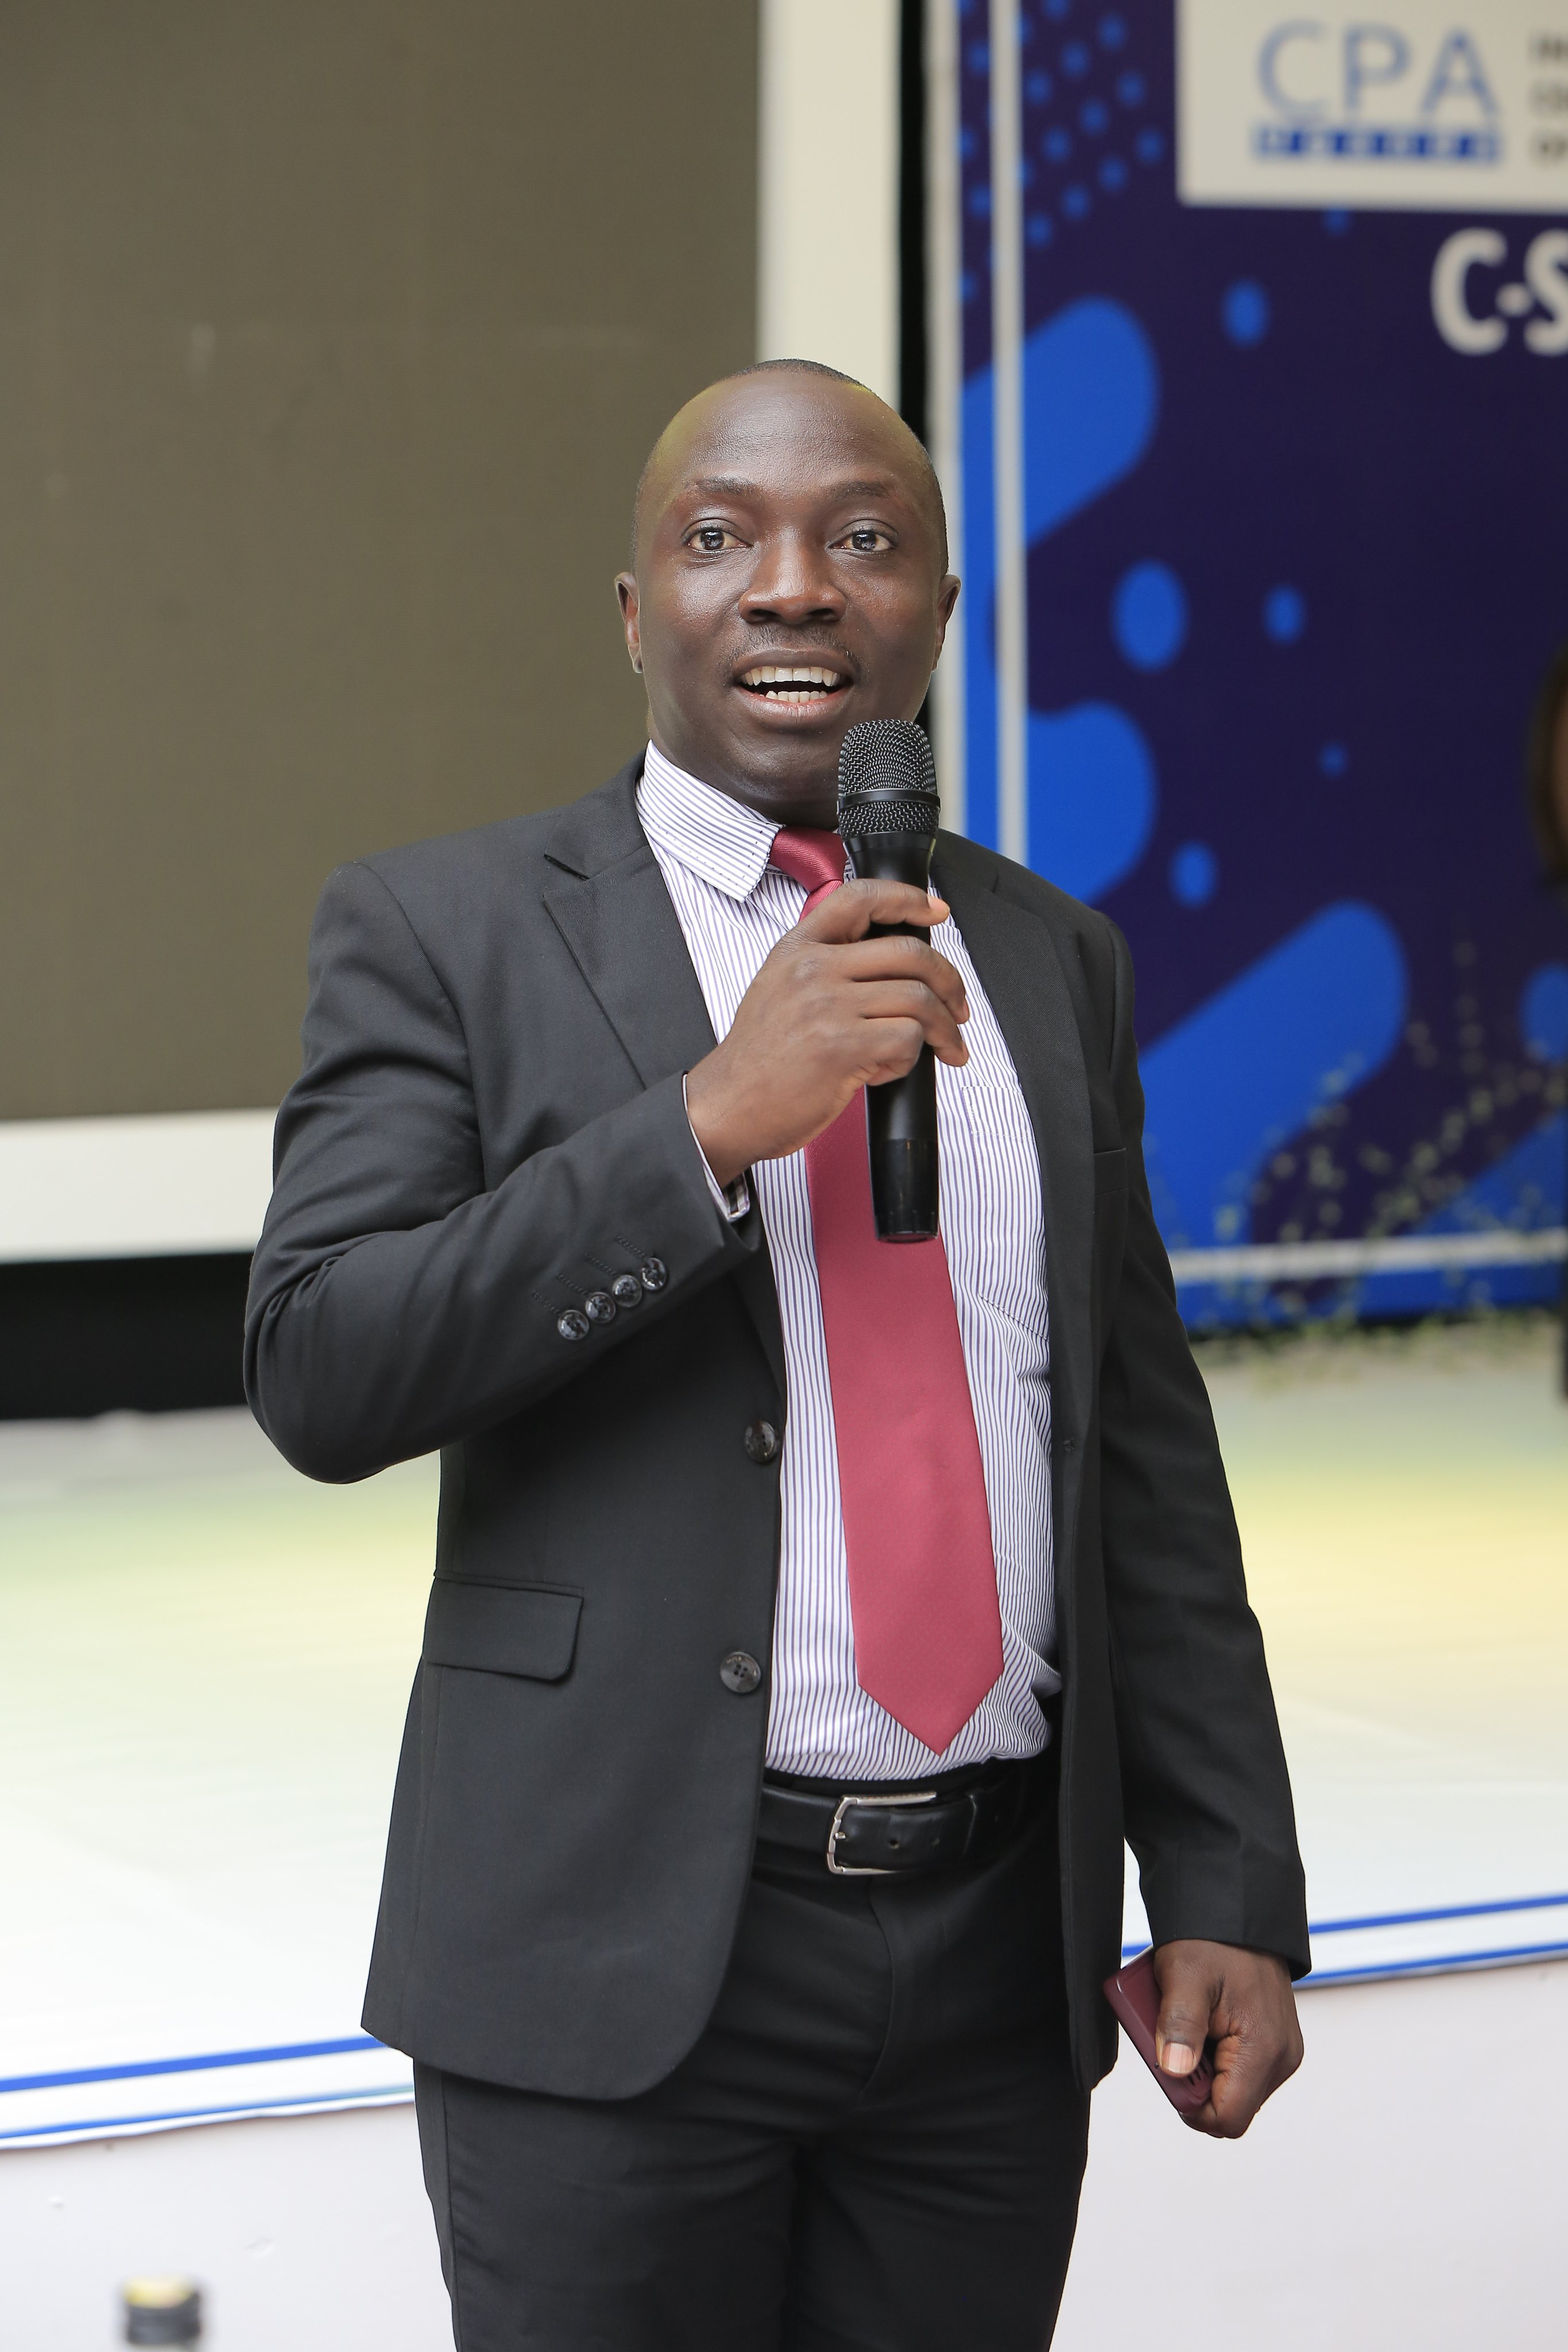 CPA Charles Lutimba, Director - Standards and Regulations ICPAU was the Master of Ceremonies at the 2nd C-suite Forum.